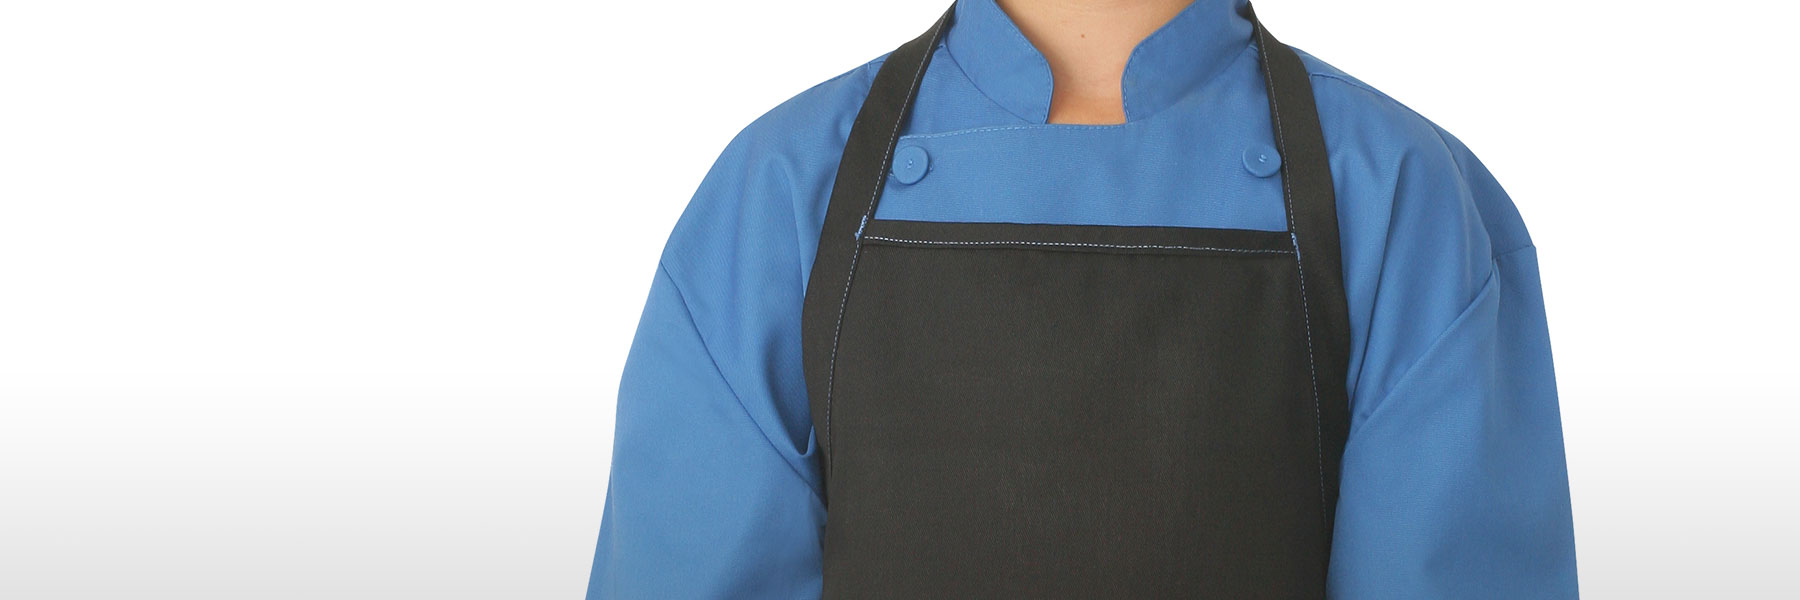 Kids Aprons - Chef Works